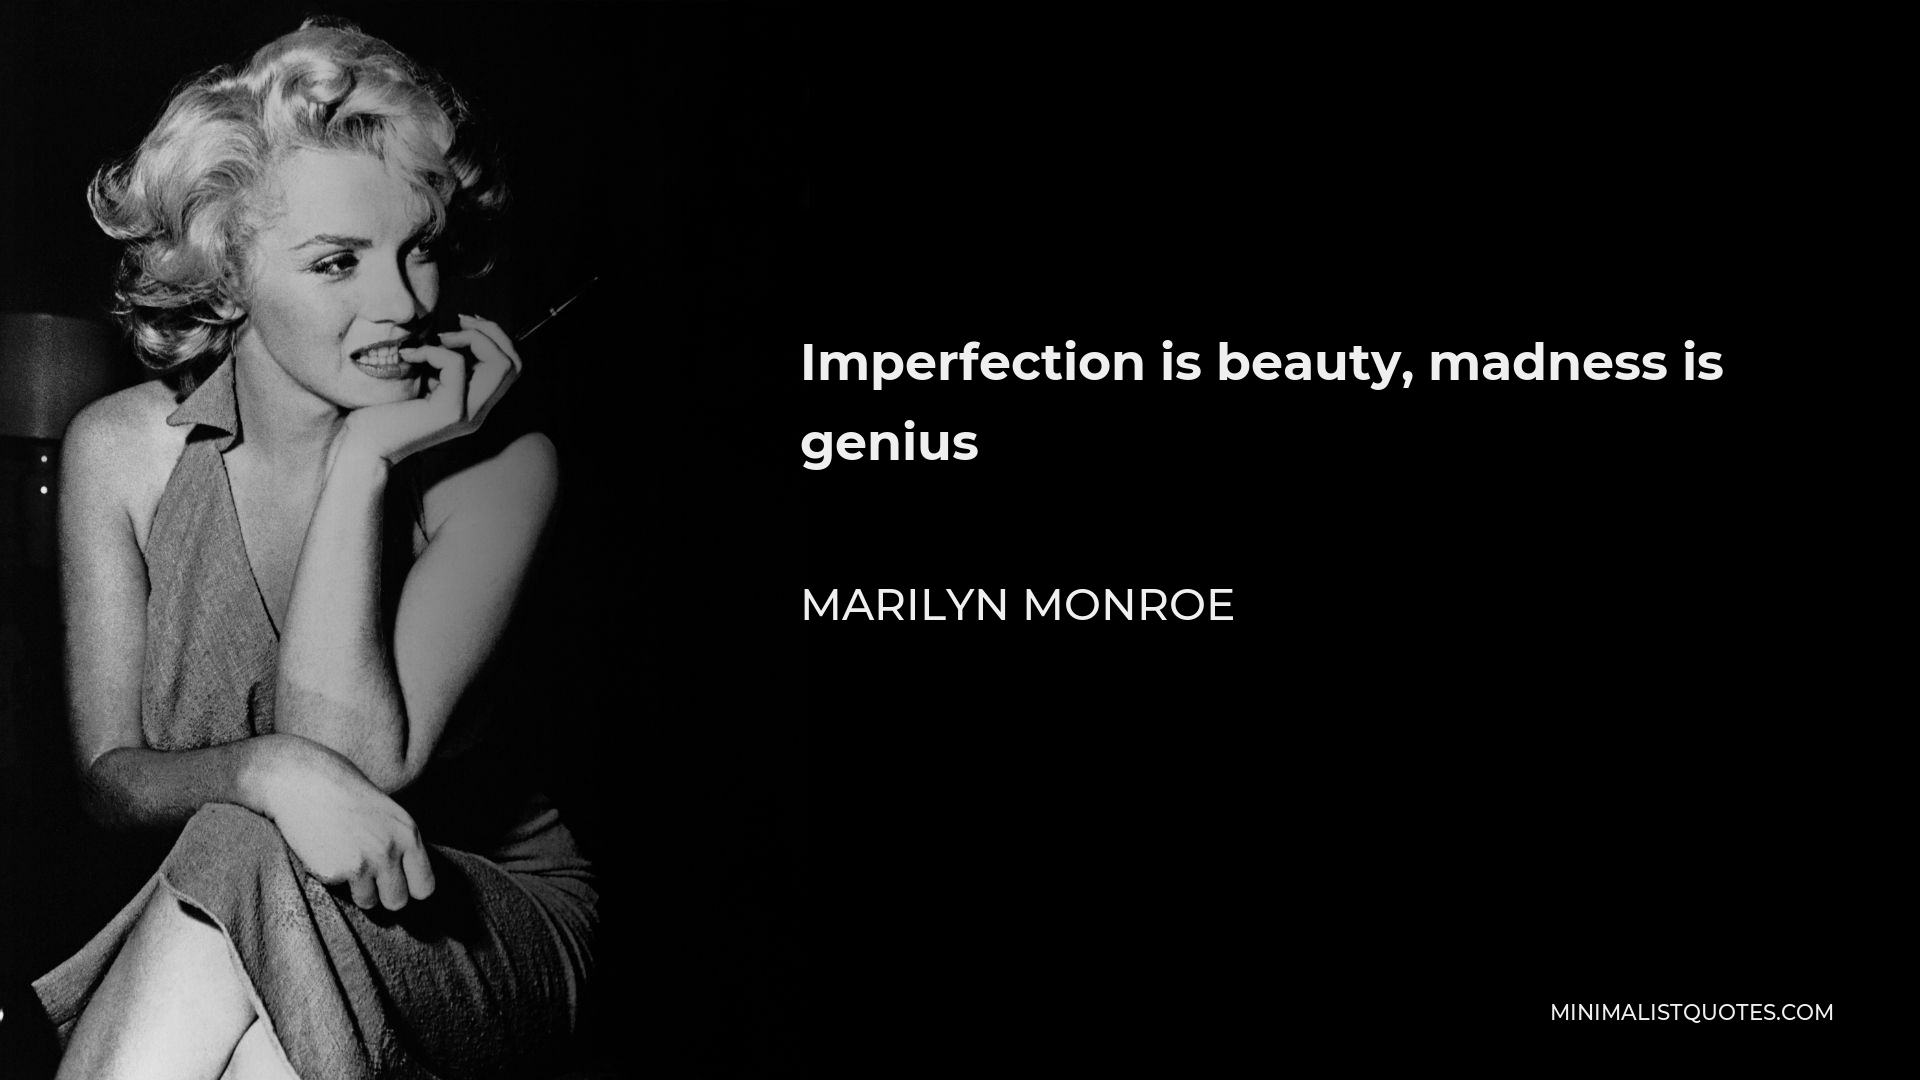 Marilyn Monroe Quote - Imperfection is beauty, madness is genius